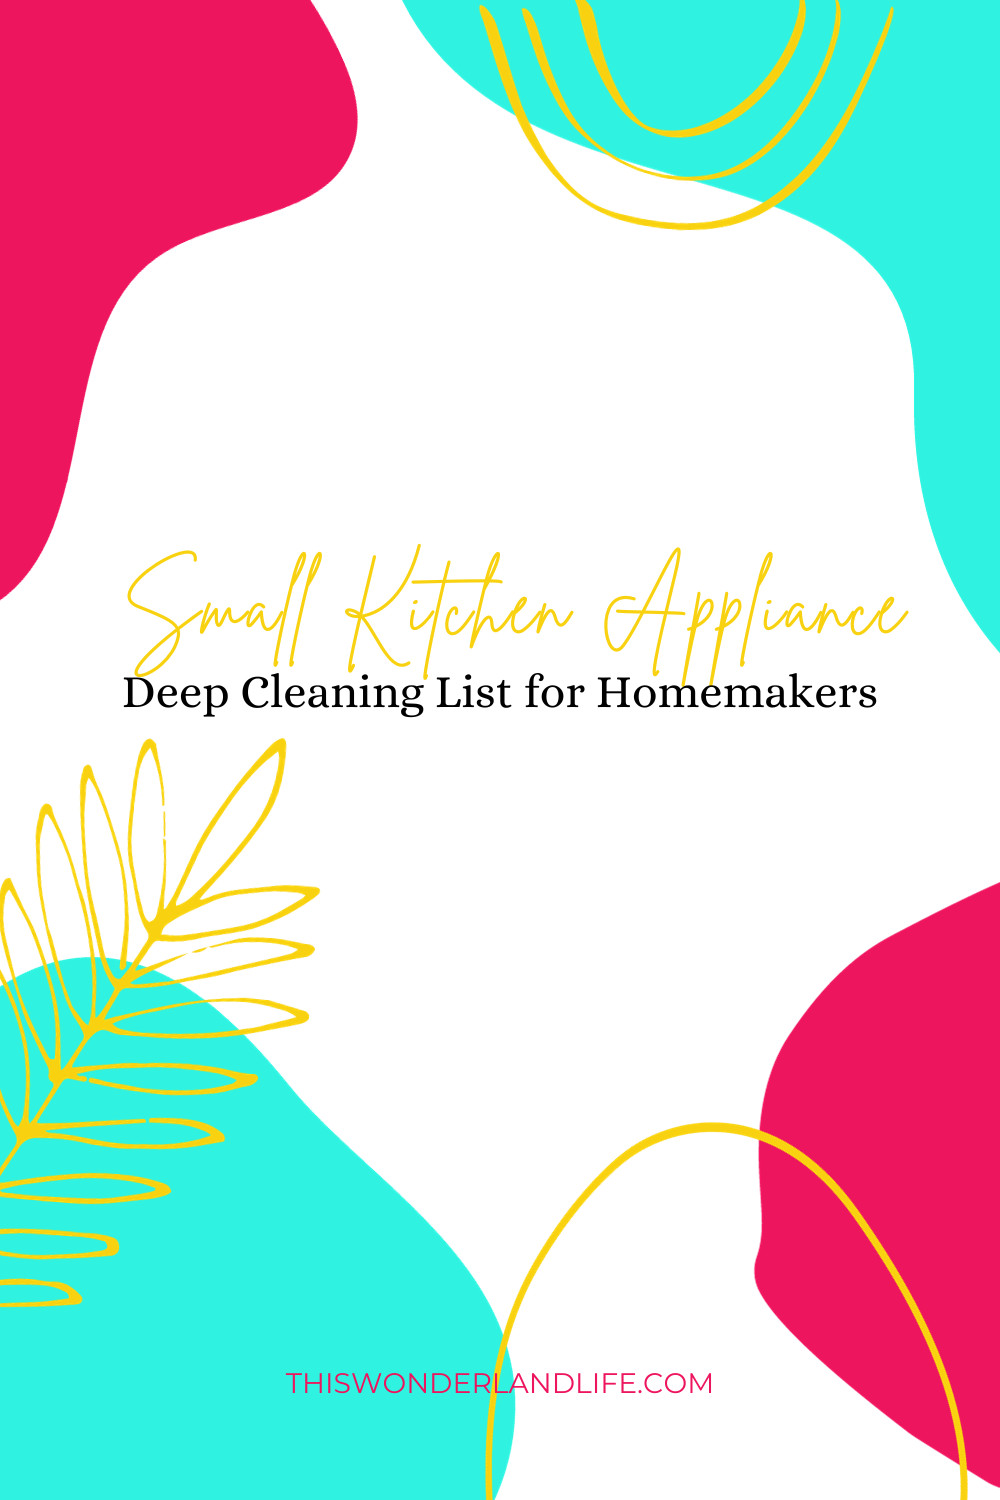 Small Kitchen Appliance Deep Cleaning List for Homemakers